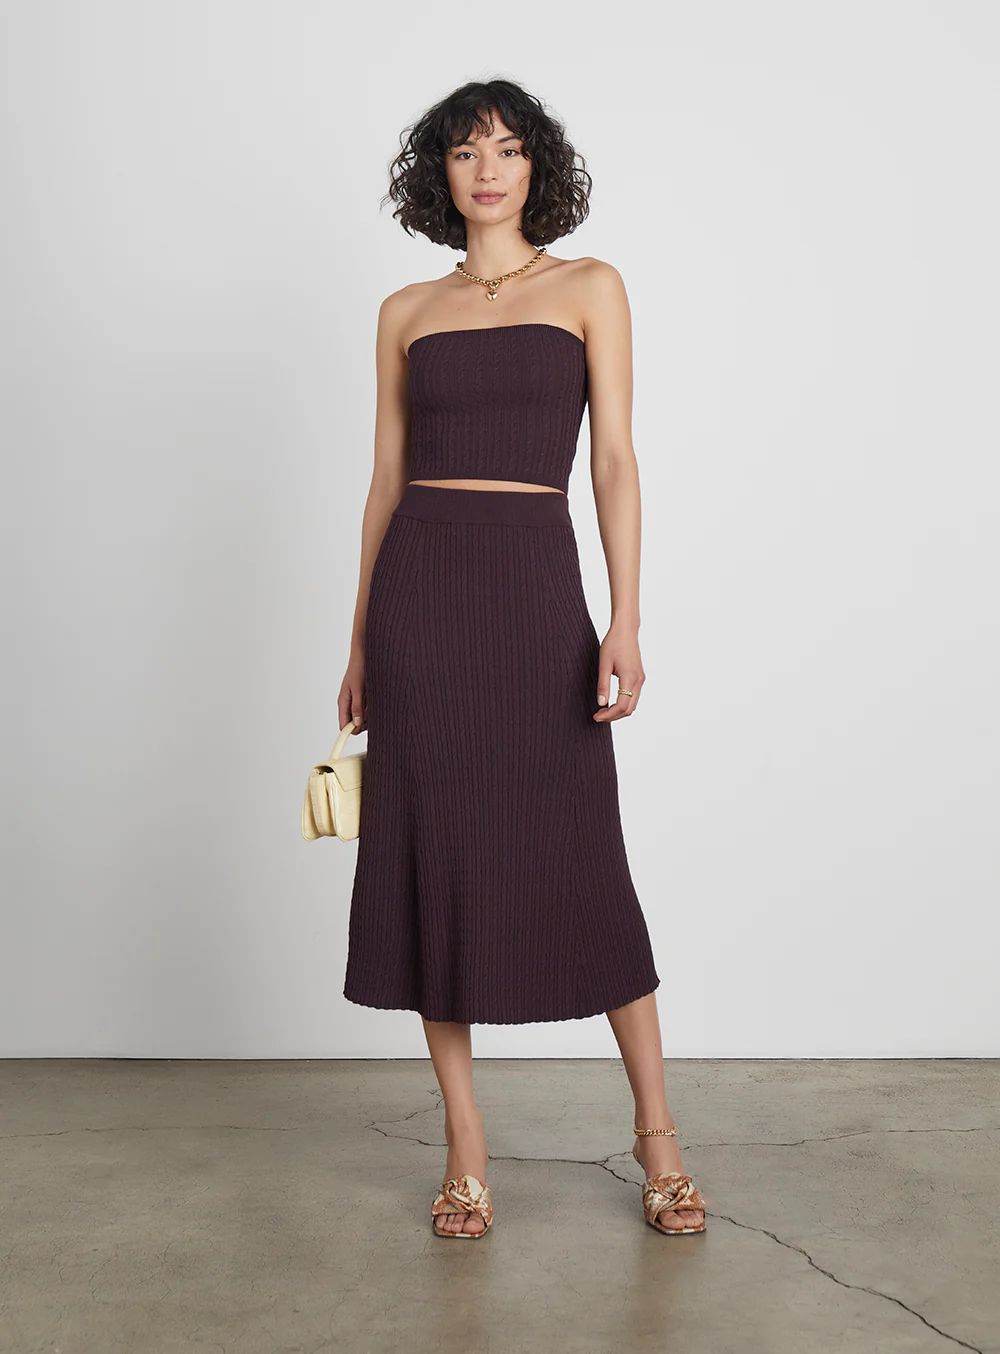 Aspen Cable Knit Midi Skirt | Who What Wear Collection